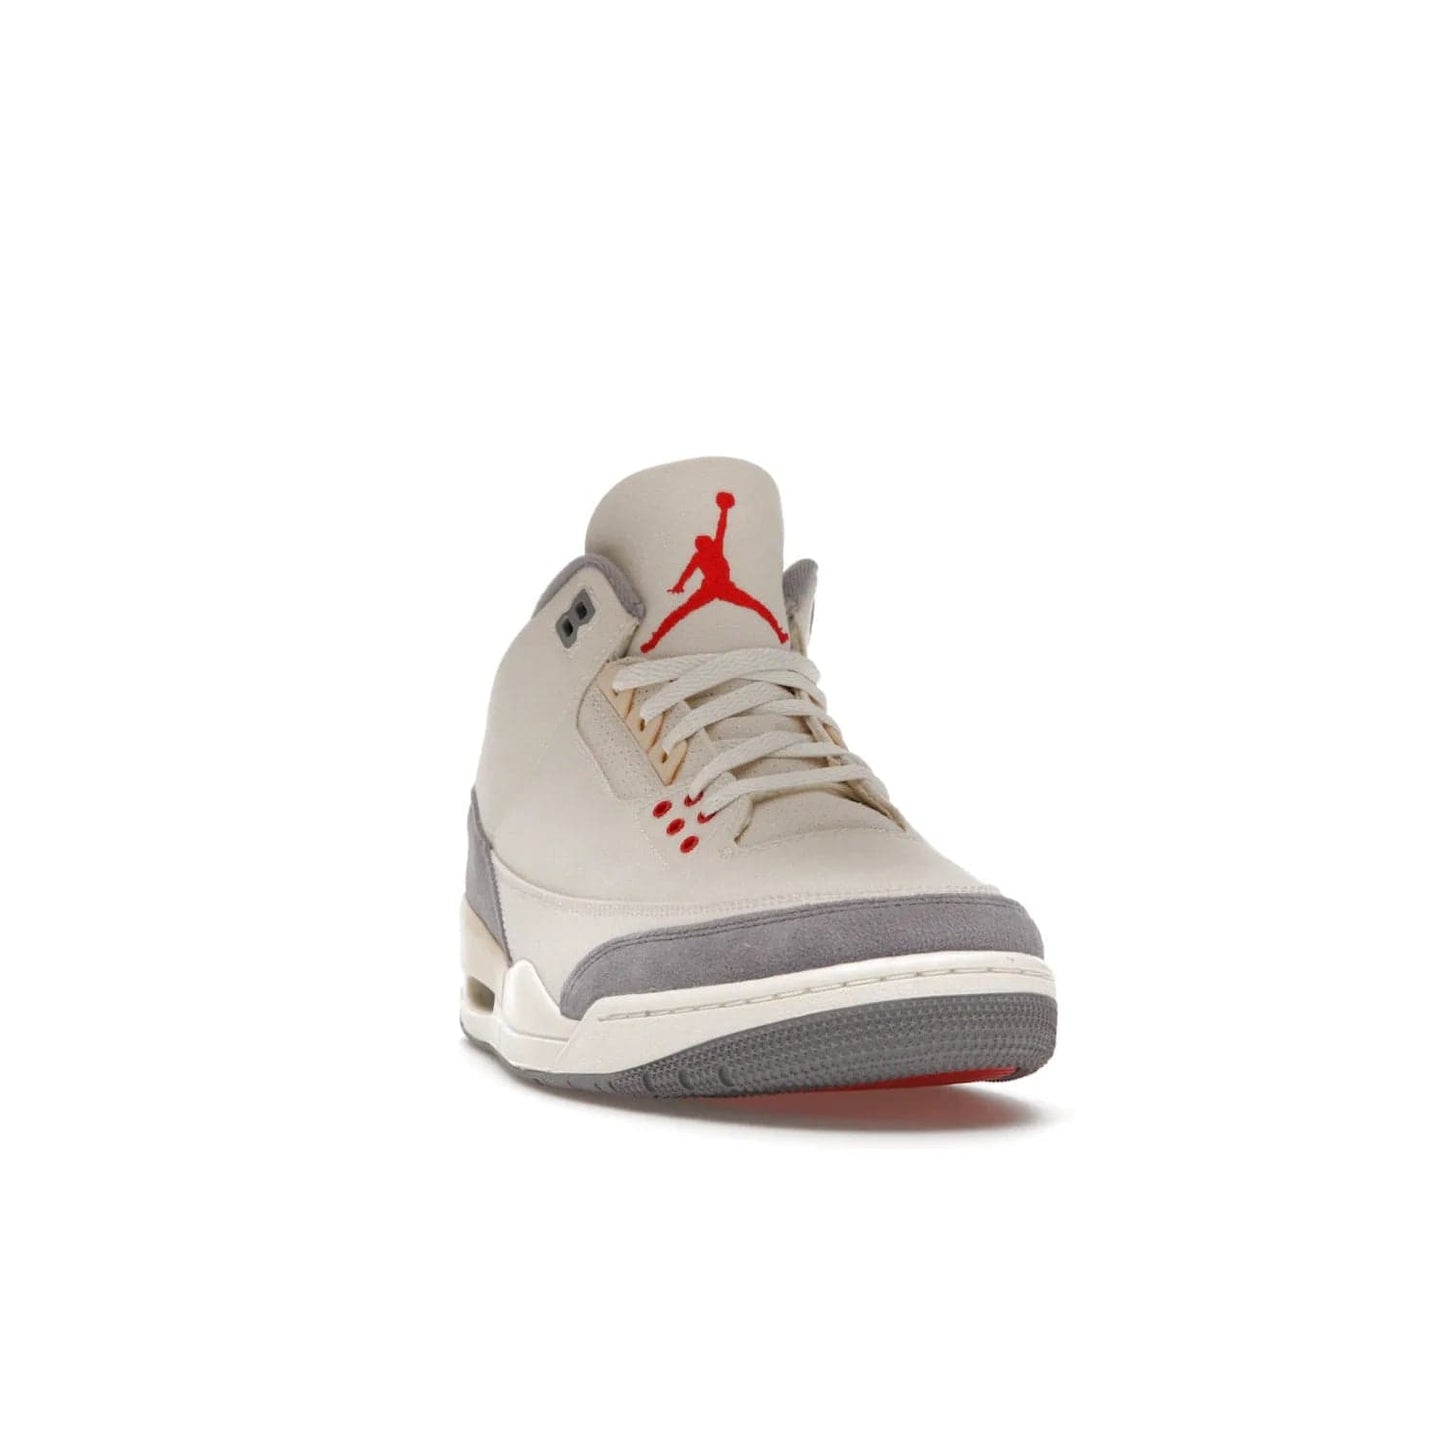 Jordan 3 Retro Muslin - Image 8 - Only at www.BallersClubKickz.com - Eye-catching Air Jordan 3 Retro Muslin in a neutral palette of grey, cream, and red. Featuring canvas upper, suede overlays and white/grey Air Max sole. Available in March 2022.